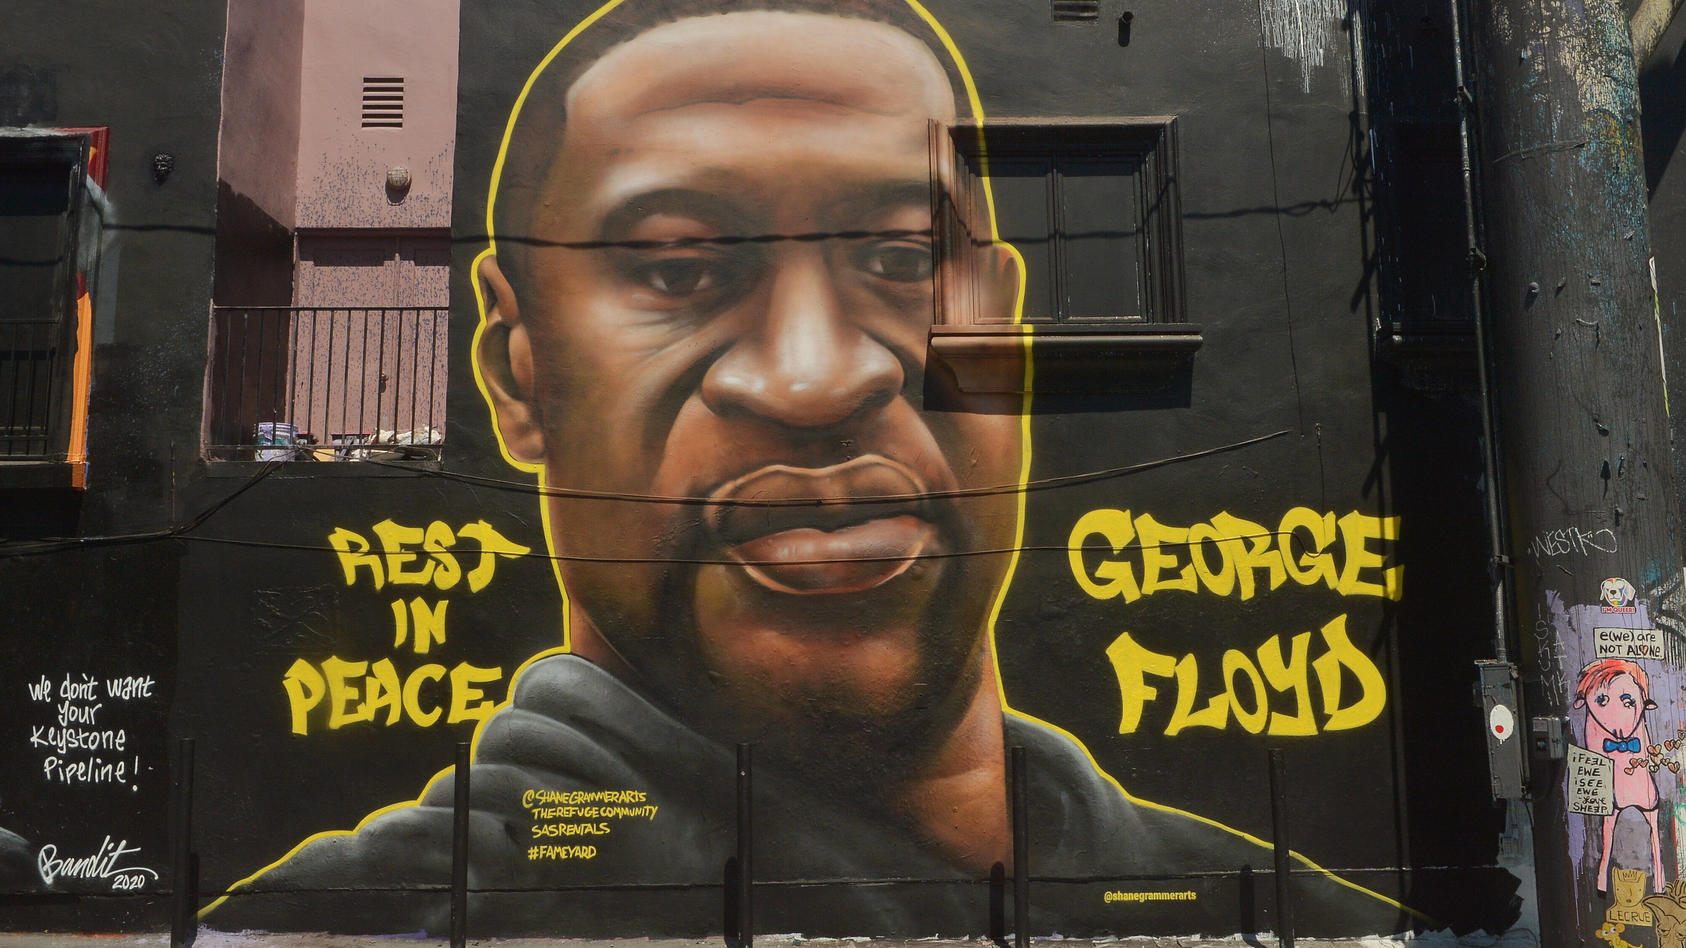 A mural go George Floyd commemorates the killing of George Floyd on Melrose Avenue in Los Angeles on Friday, June 12, 2